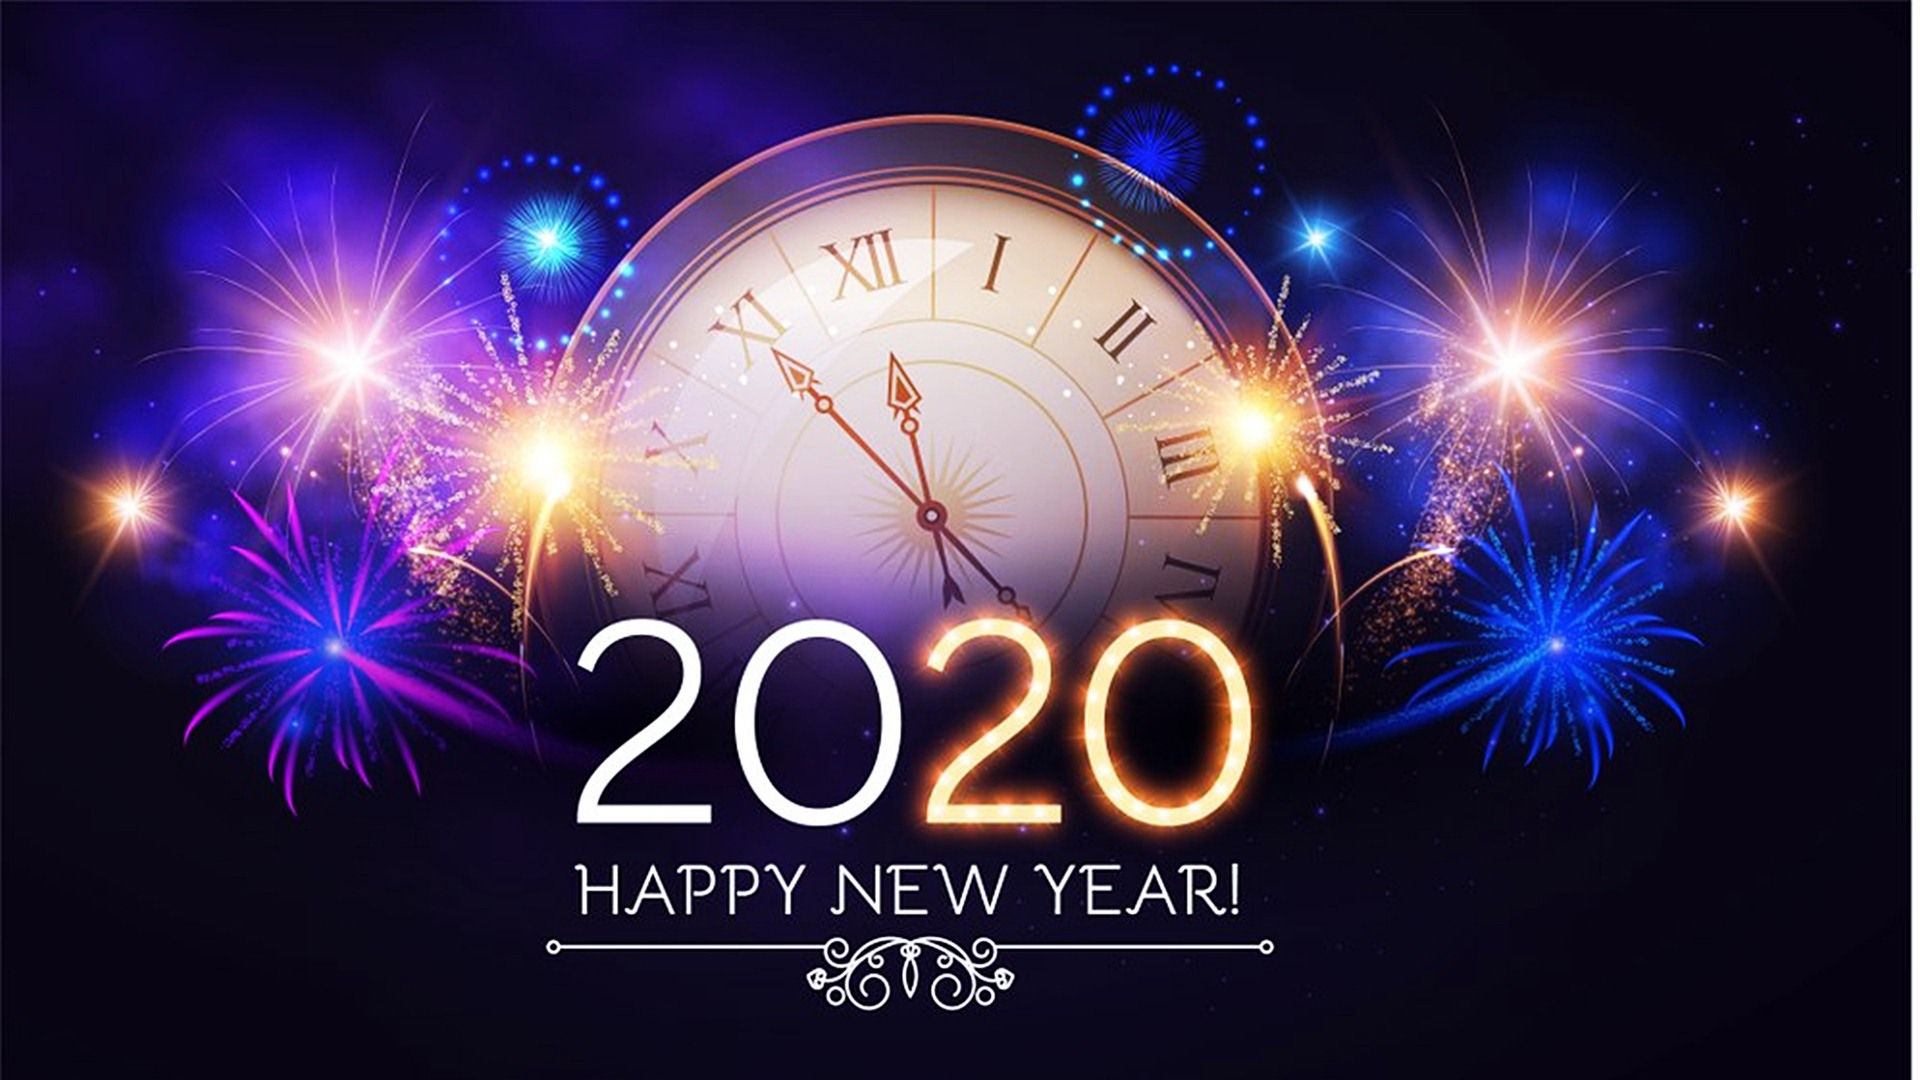 Happy New Year Image Wishes Quotes And Wallpaper Tech Booot